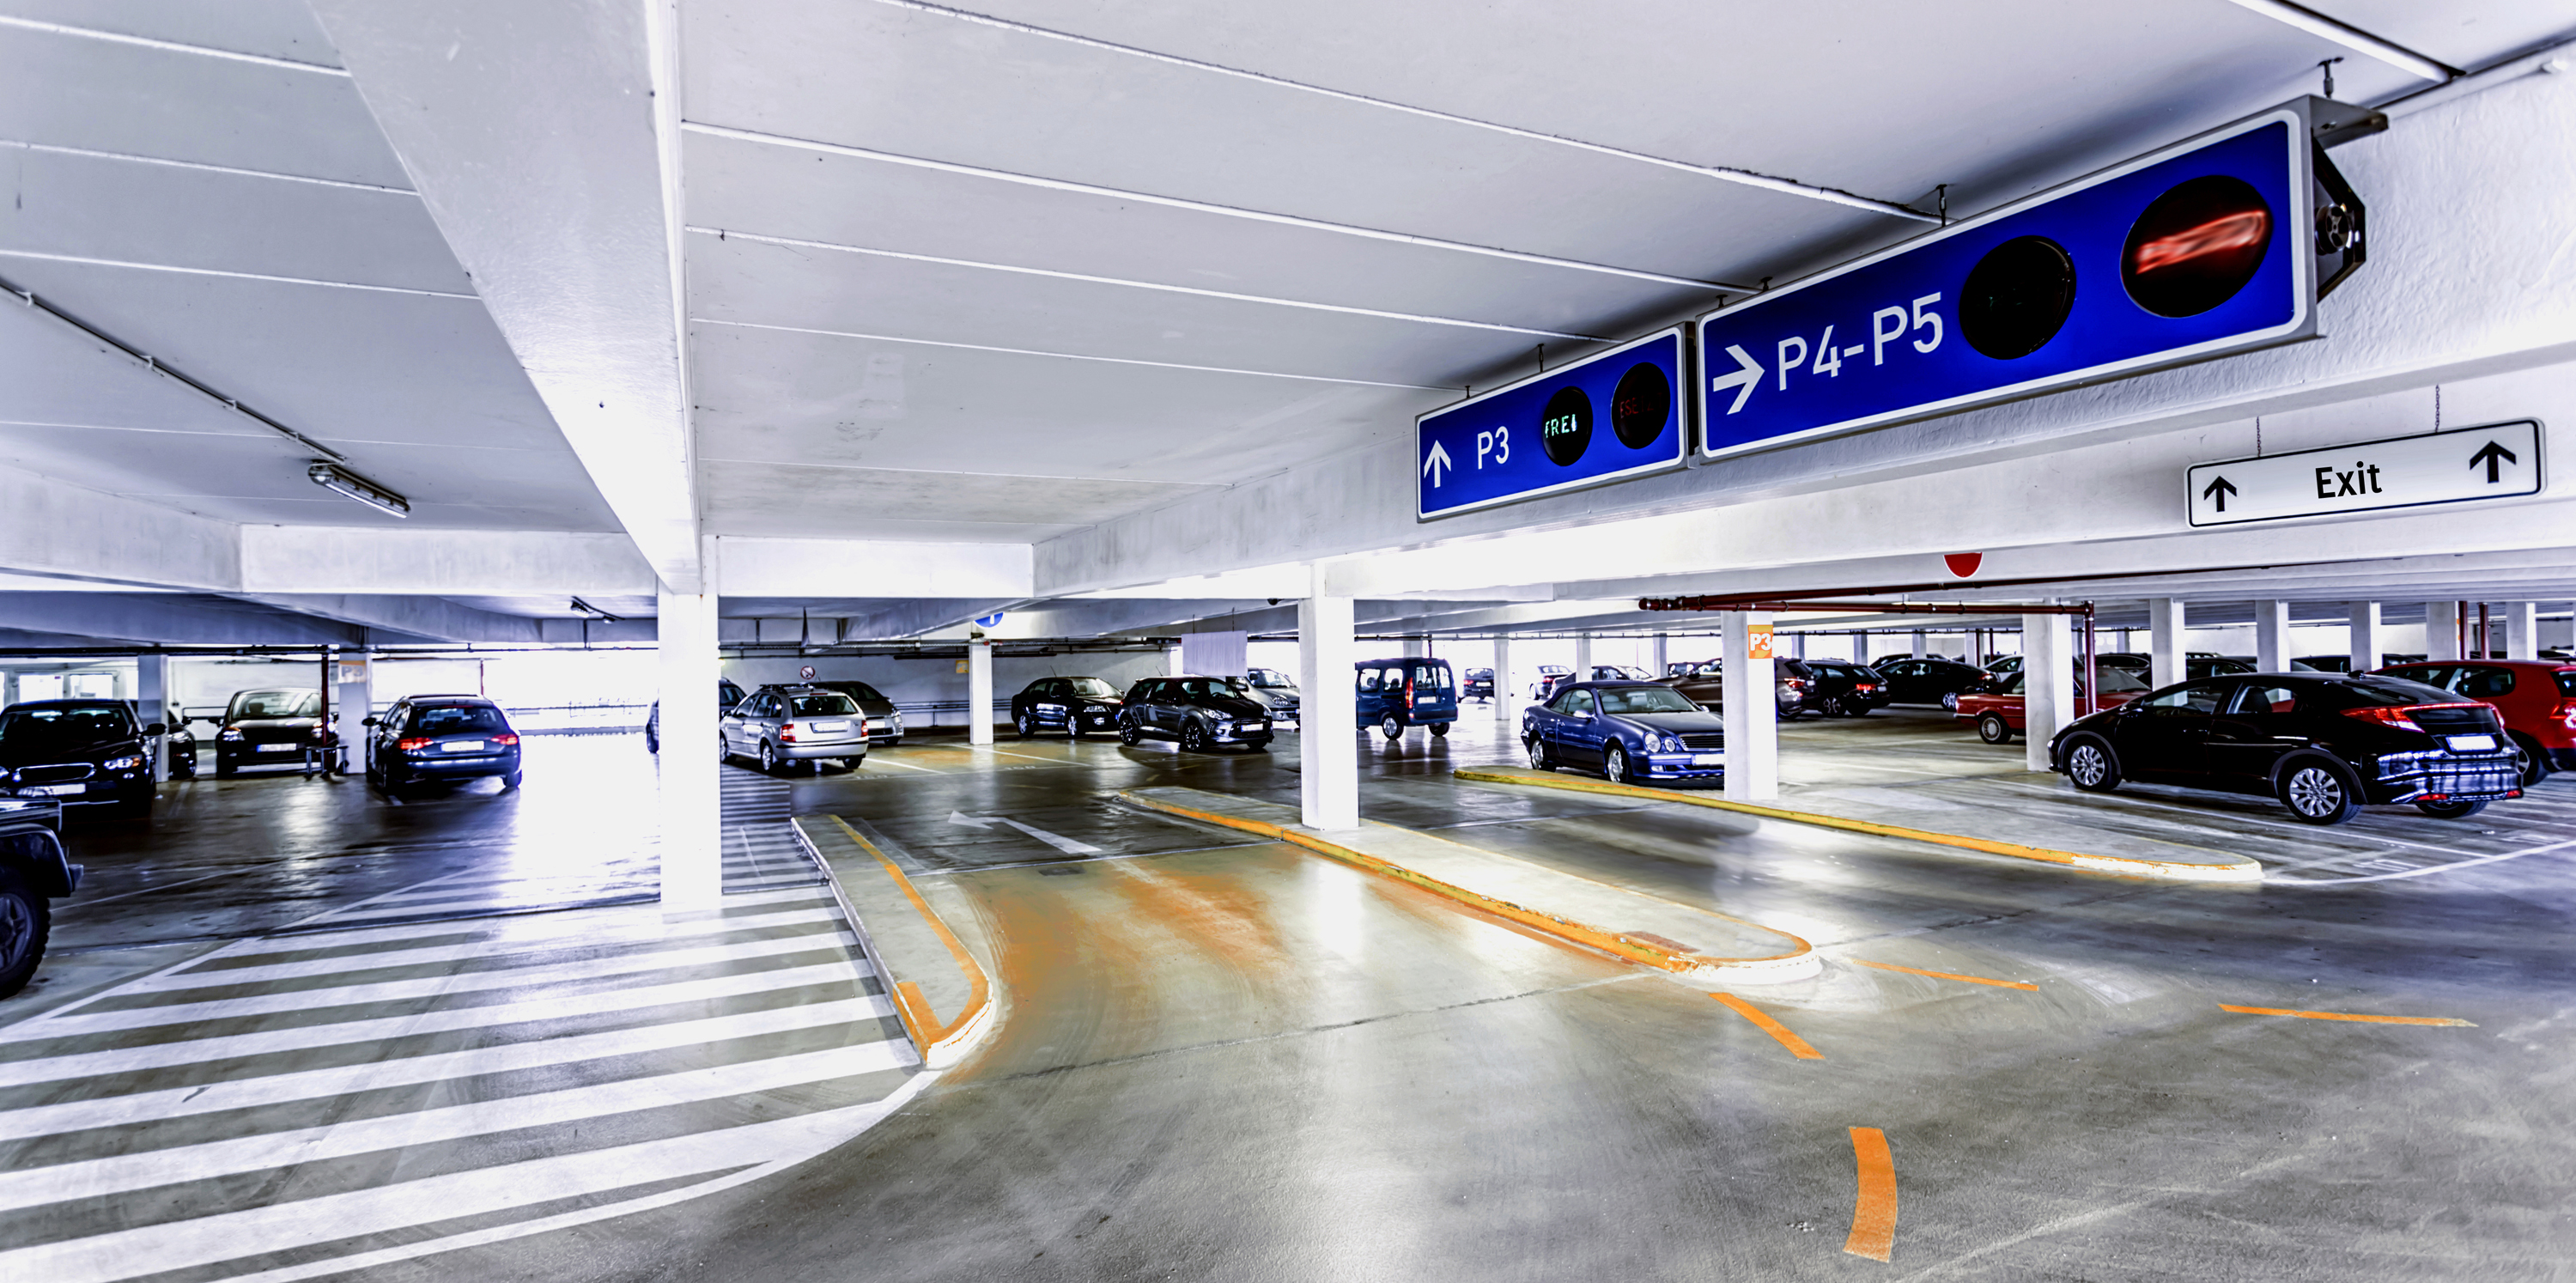 Quercus starts 2016 with new parking installations